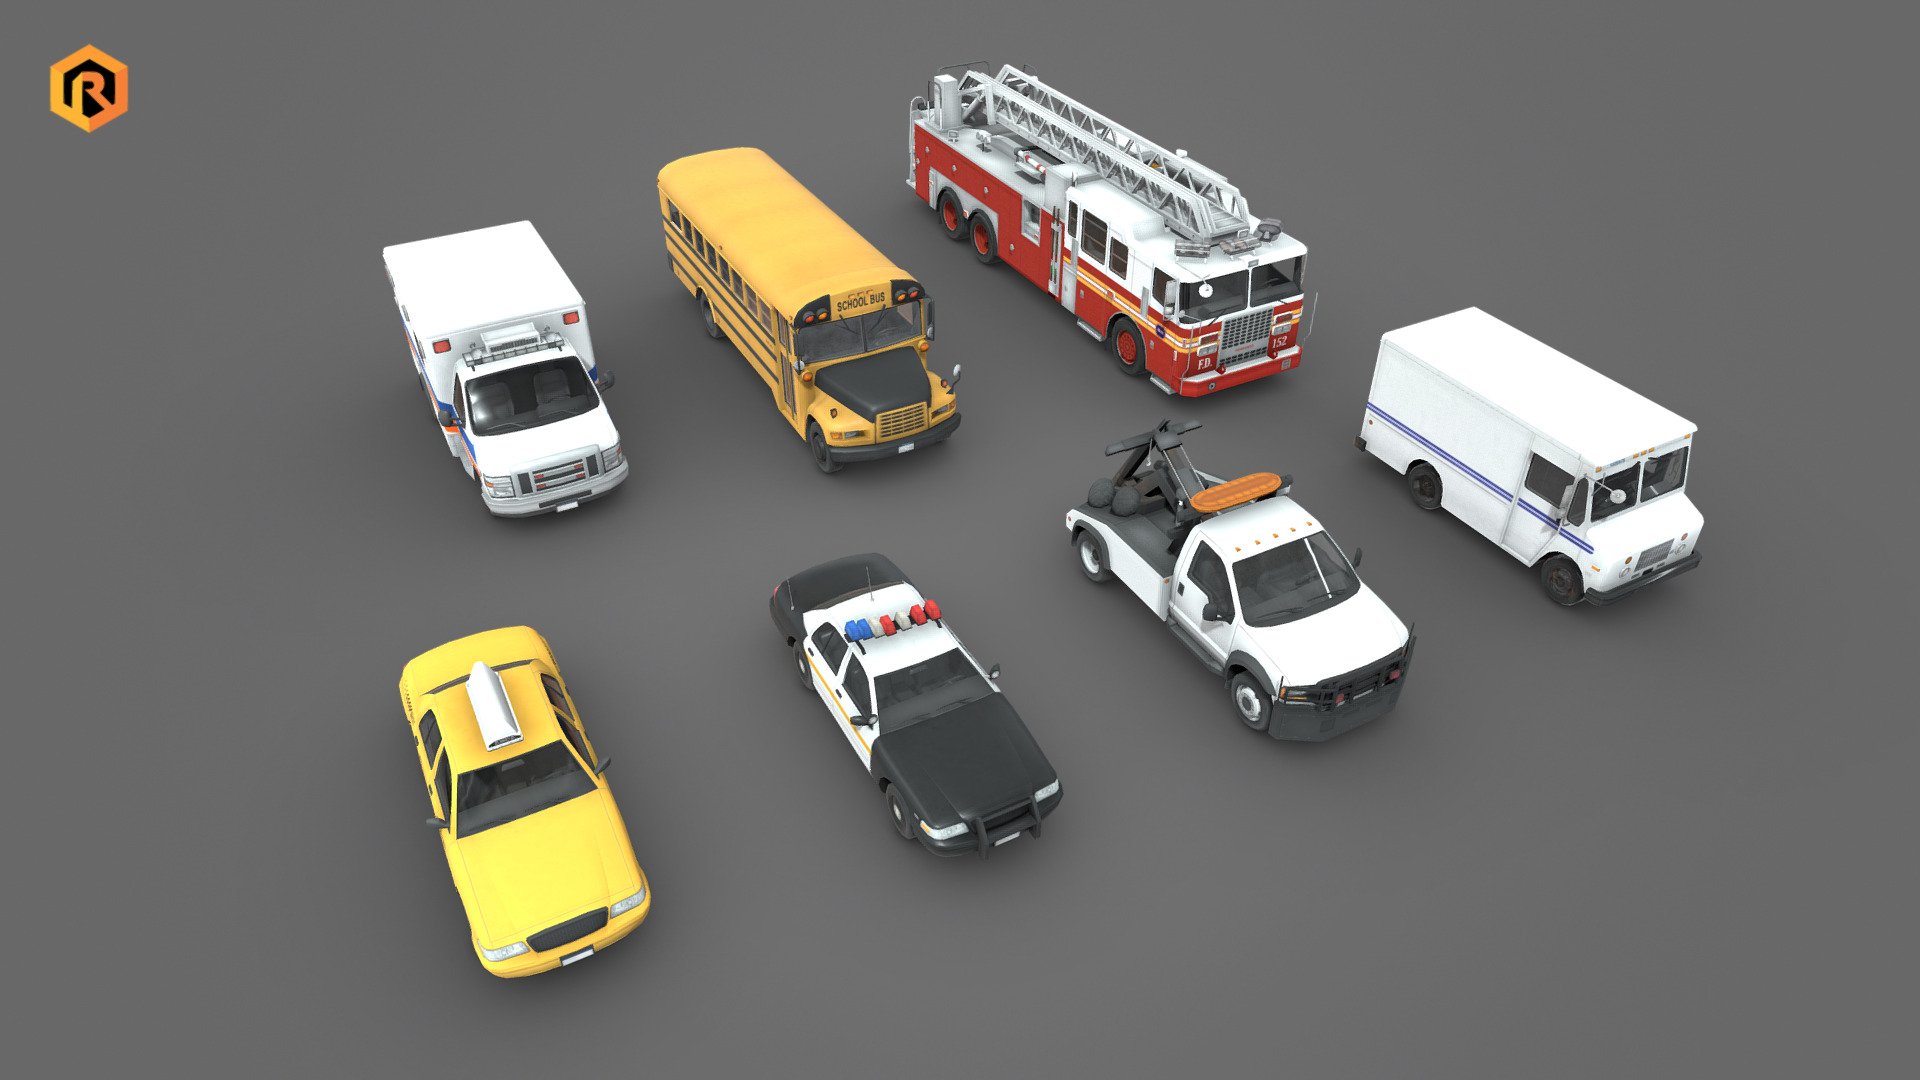 This pack includes 7 low-poly 3D models of emergency service cars.

Interior parts of cars are also modeled but with less detail.

These assets are best for use in games and other VR / AR, real-time applications such as Unity or Unreal Engine.
Lot of additional file formats included (Blender, Unity, Maya,  etc.)

Collection Includes:




New York Taxi - 4743 Triangles, 2048 Diffuse and AO textures

Ambulance Vehicle - 5348 Triangles, 2048 Diffuse and AO textures

USPS Mail Truck - 4180 Triangles, 2048 Diffuse and AO textures

NYPD Police Car - 5157 Triangles, 2048 Diffuse and AO textures

School Bus - 6244 Triangles, 4096 Diffuse and AO textures

NYPD Tow Truck - 5764 Triangles, 2048 Diffuse and AO textures

Fire Truck - 8996 Triangles, 4096 Diffuse and AO textures

More file formats are available in additional zip file on product page !  

Please feel free to contact us if you have any questions with this asset ! - 7 Low-Poly Service Cars Collection - Buy Royalty Free 3D model by Rescue3D Assets (@rescue3d) 3d model